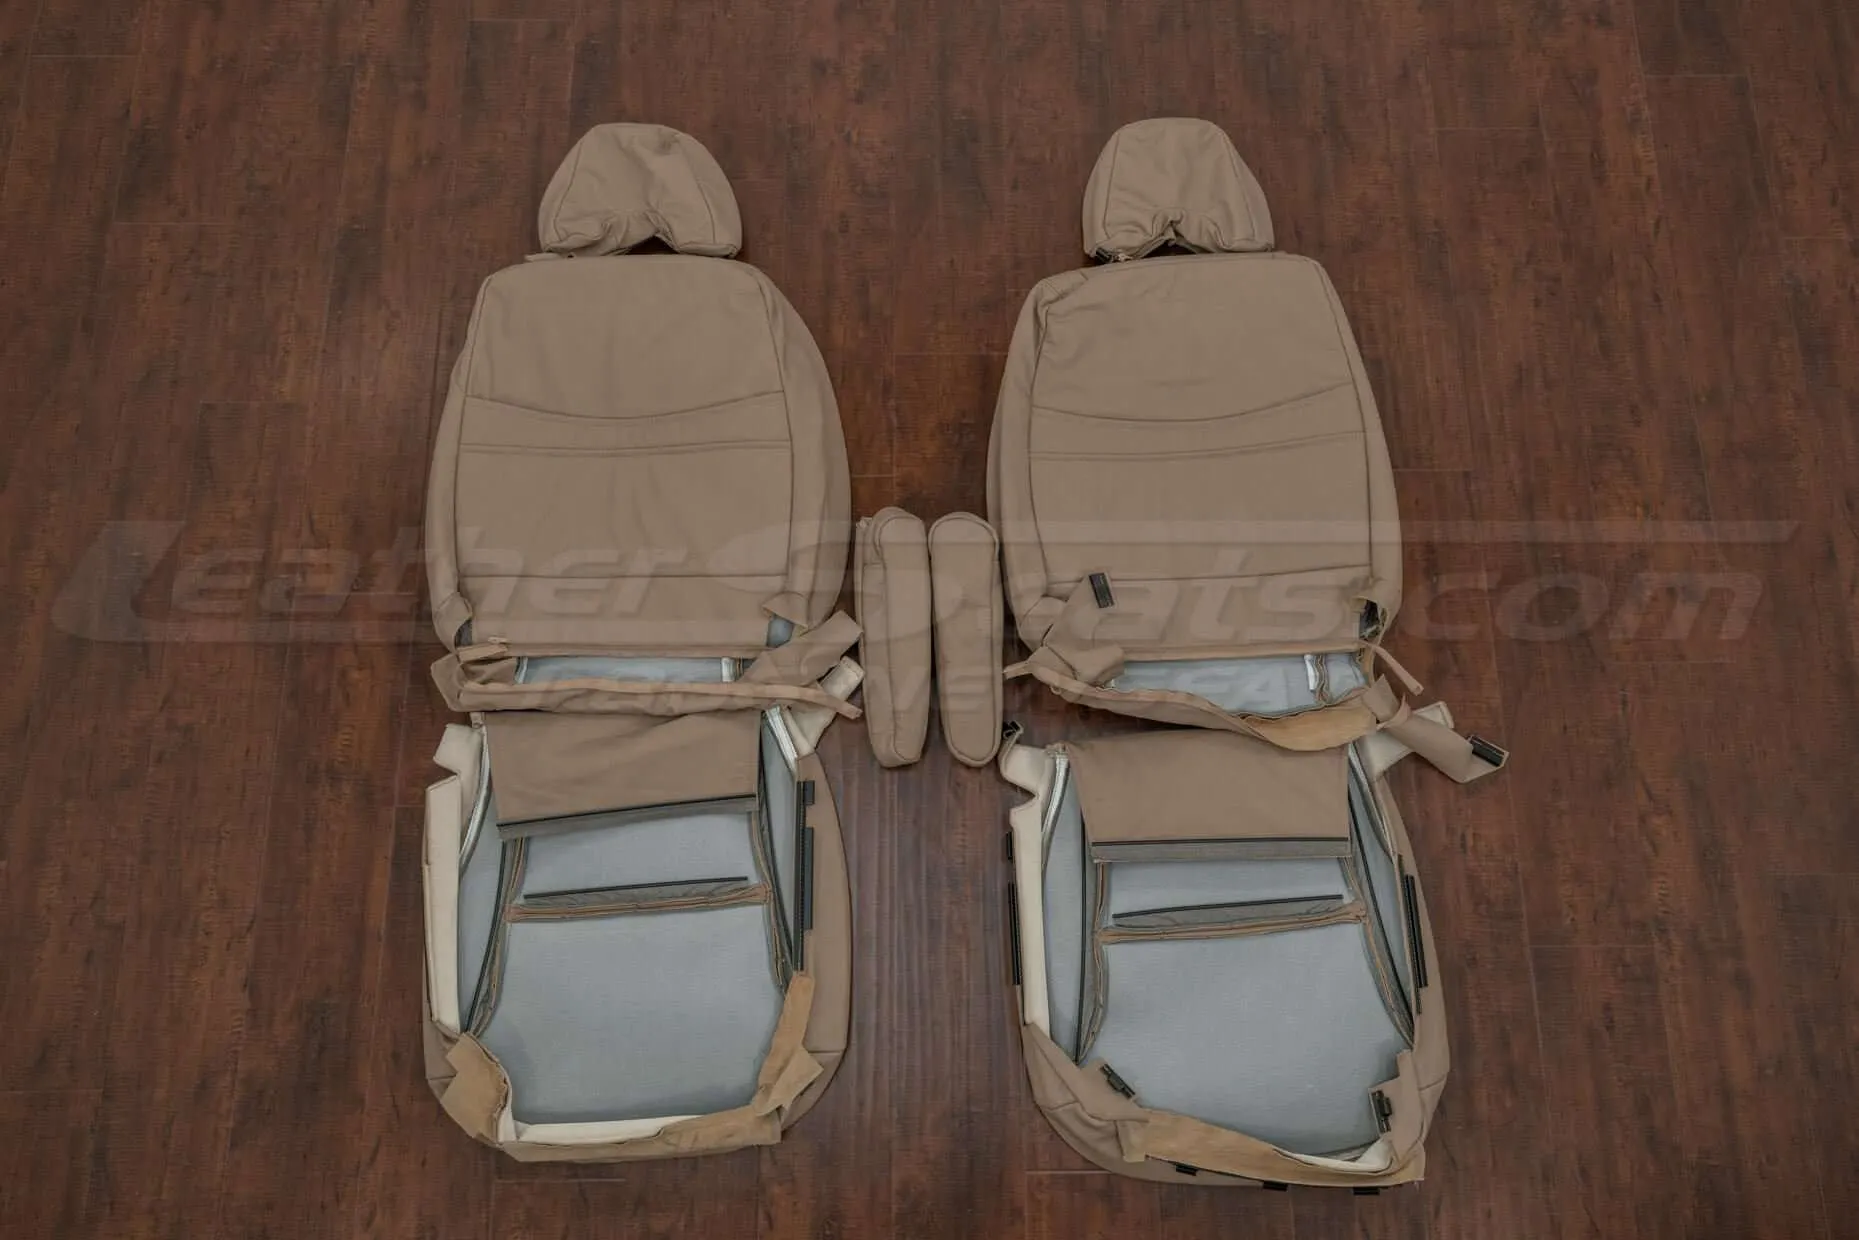 Back view of front seat upholstery and armrests